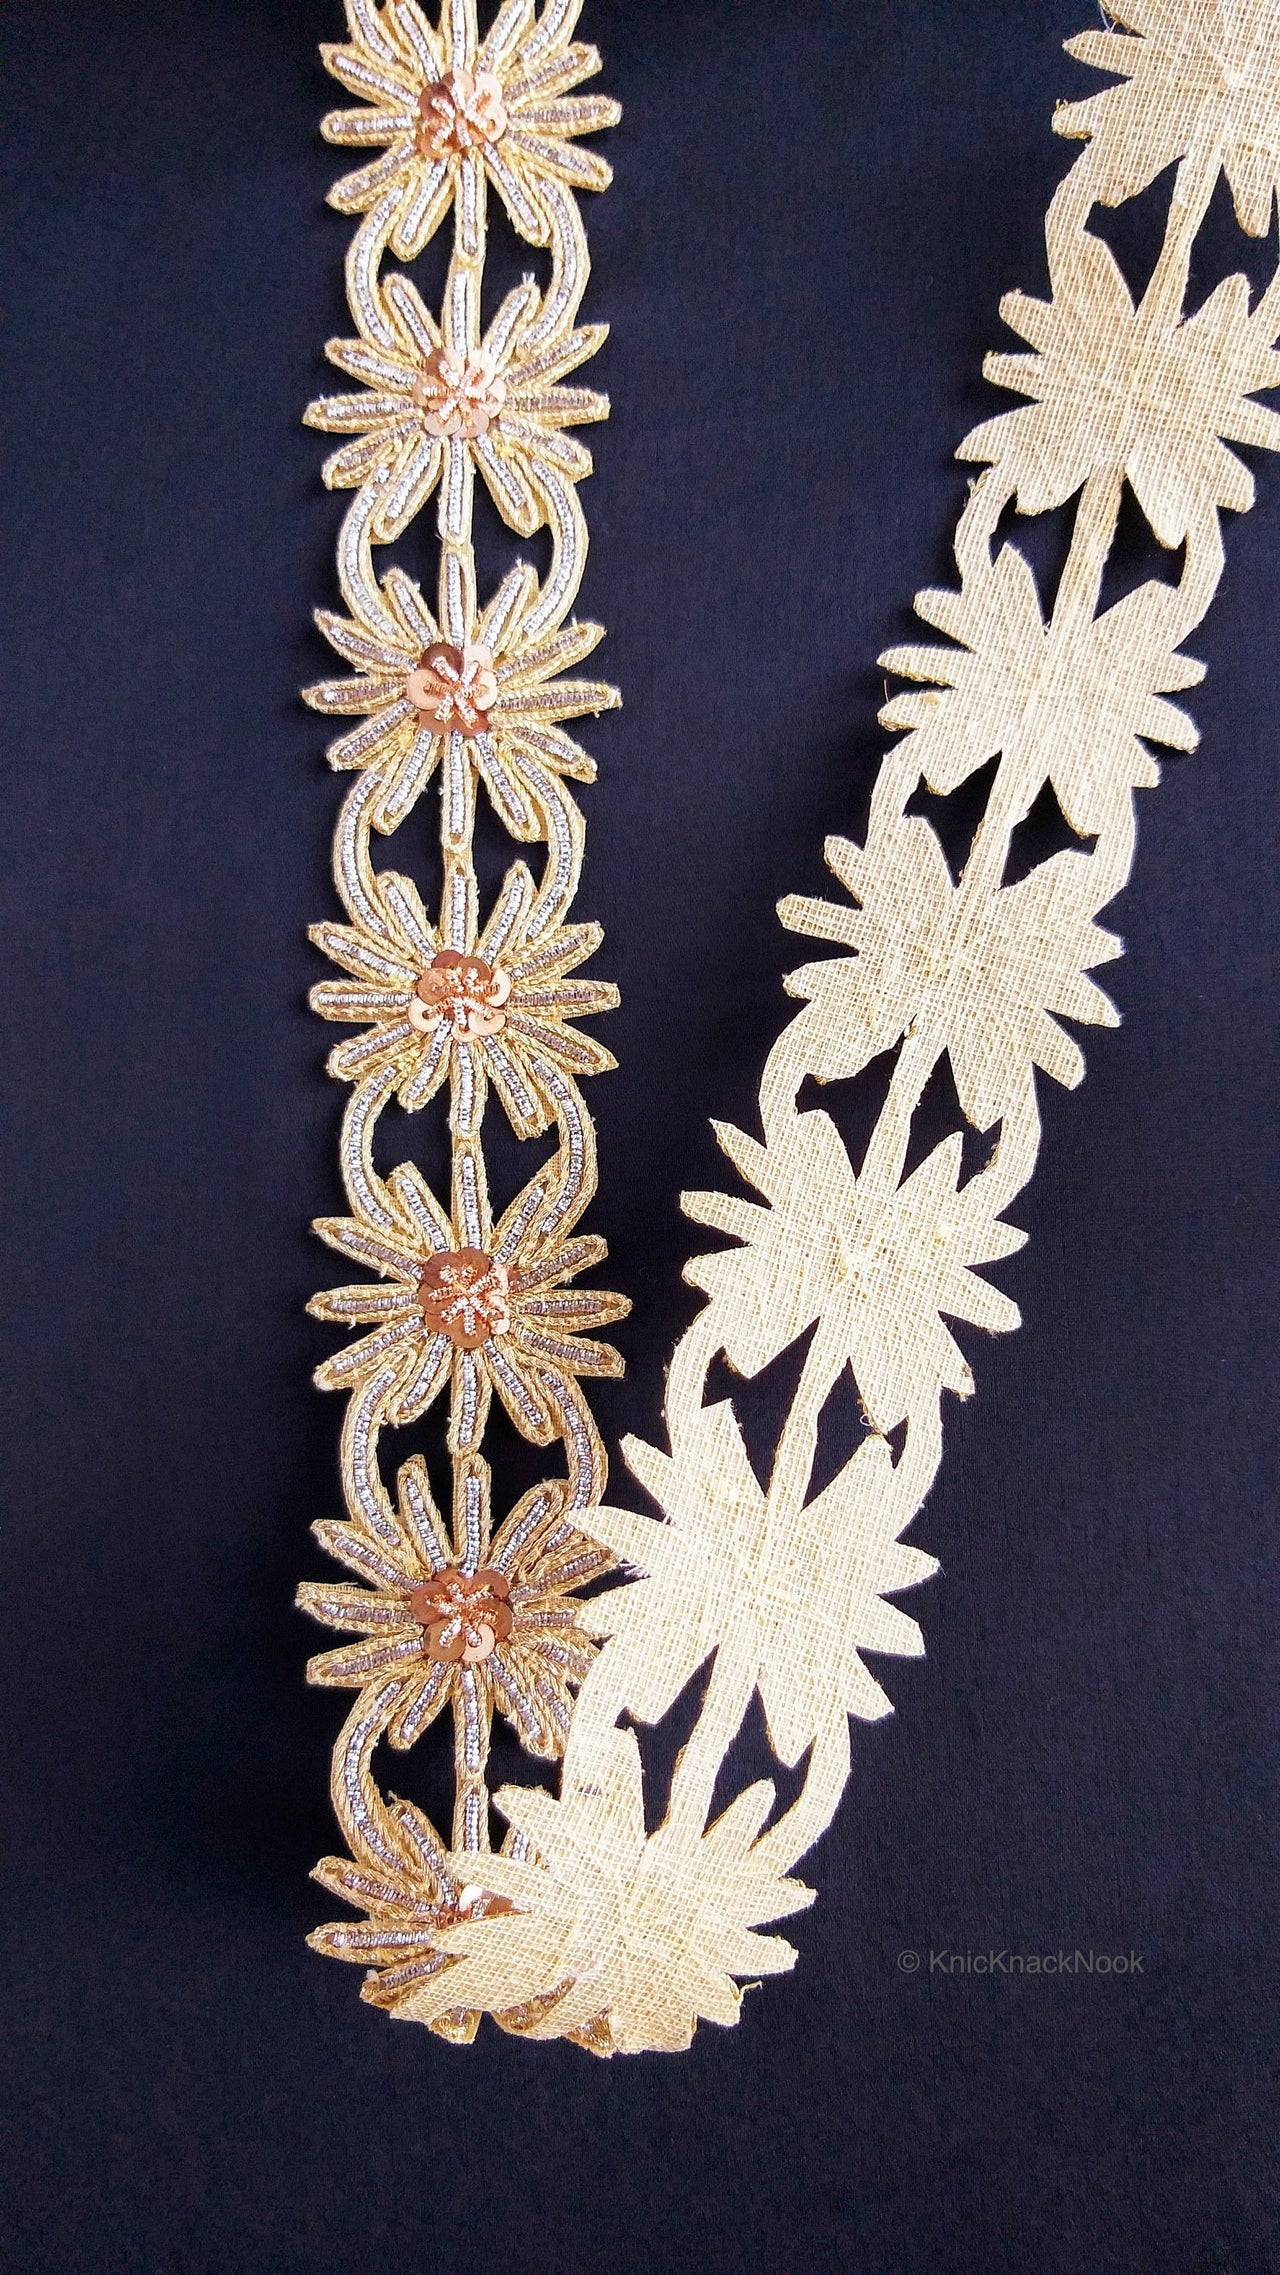 Embroidered Silver And Gold Zardozi Floral Trim, Threadwork Lace, Indian Trim